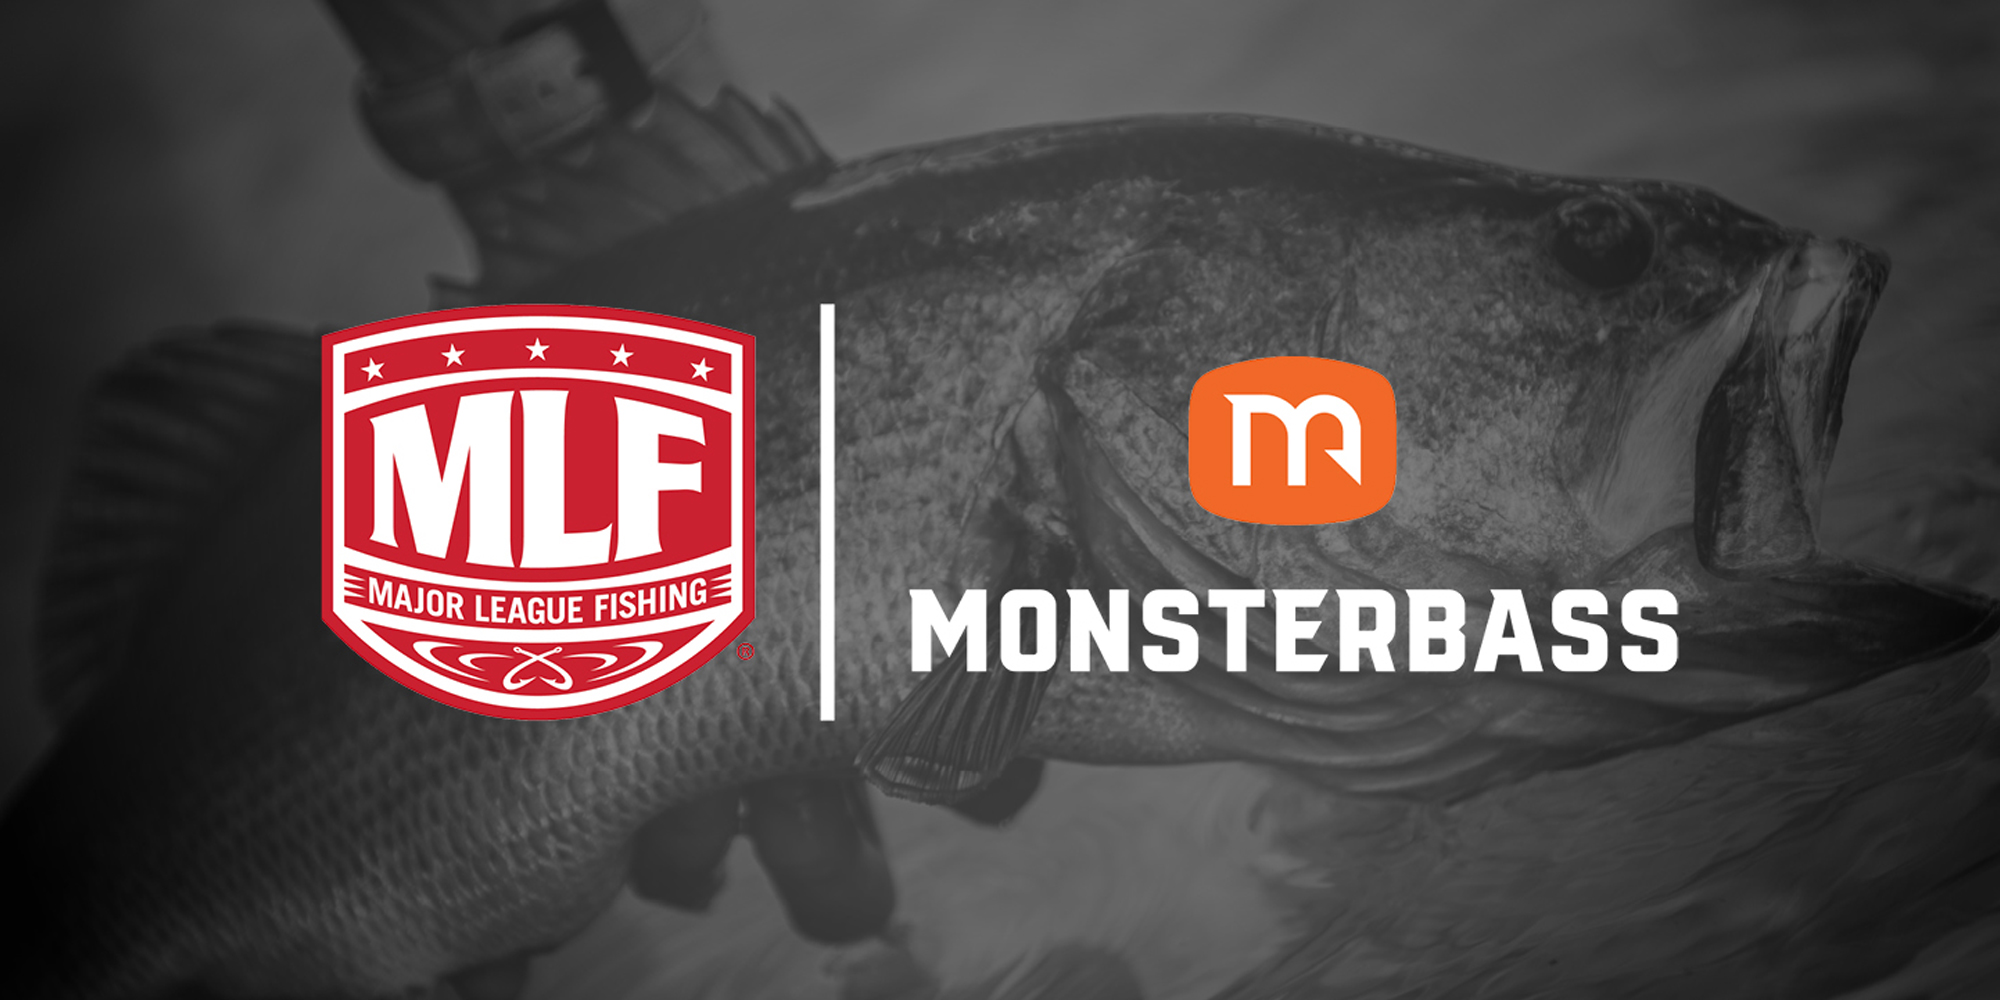 Major League Fishing partners with MONSTERBASS to create a new